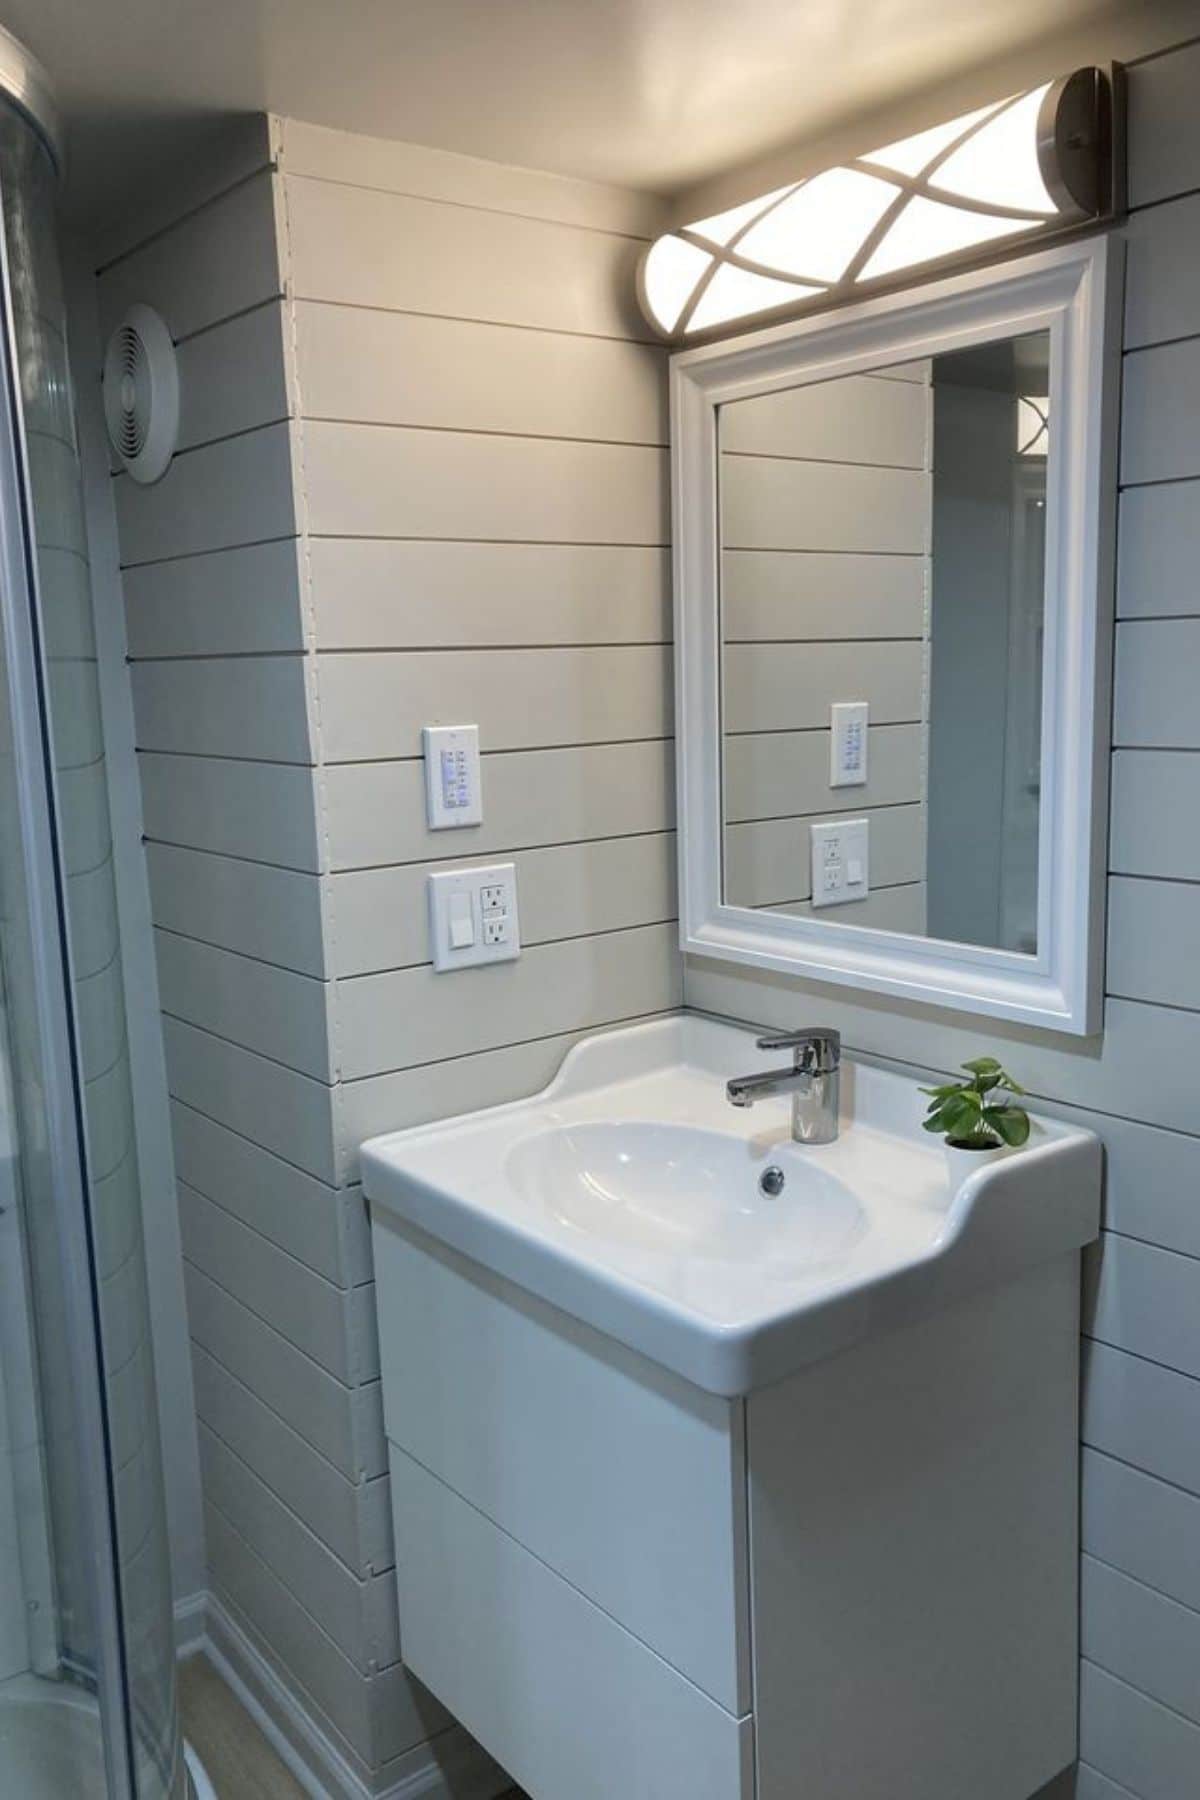 white bathroom sink with white trimmed mirror above